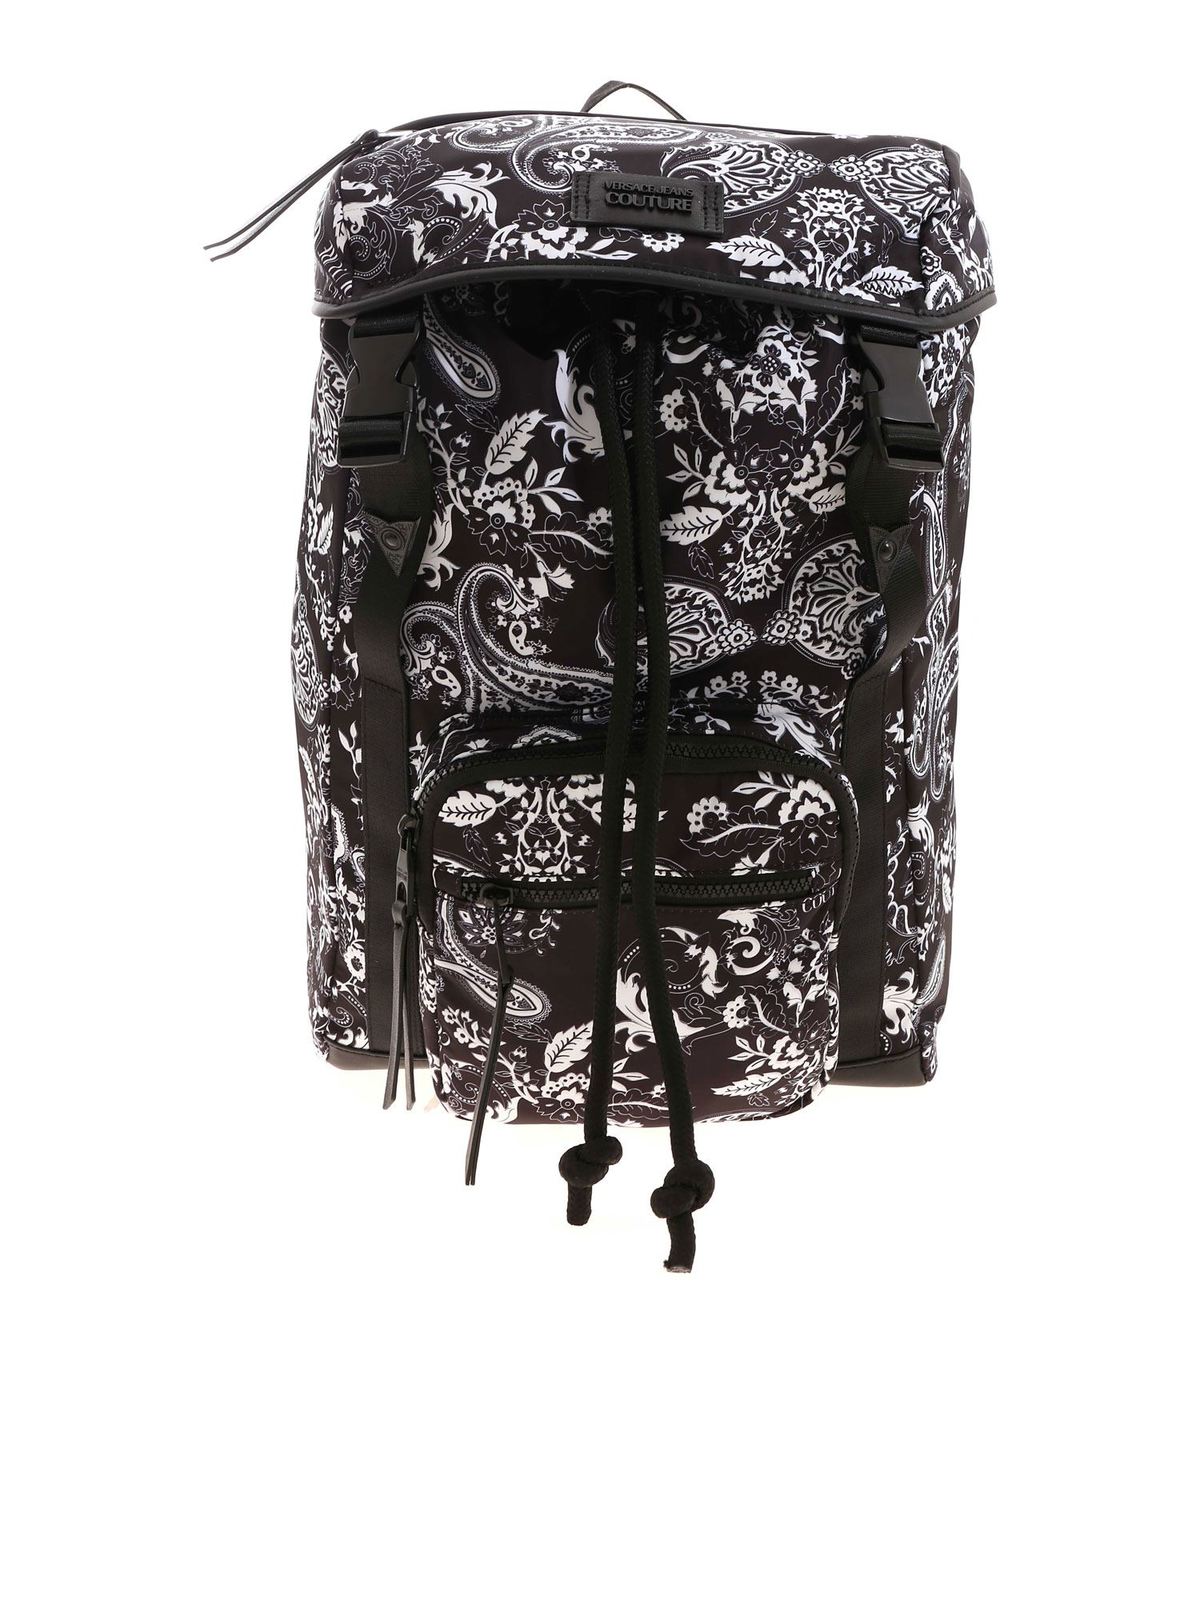 VERSACE JEANS COUTURE BAROQUE LOGO PATTERN BACKPACK IN BLACK